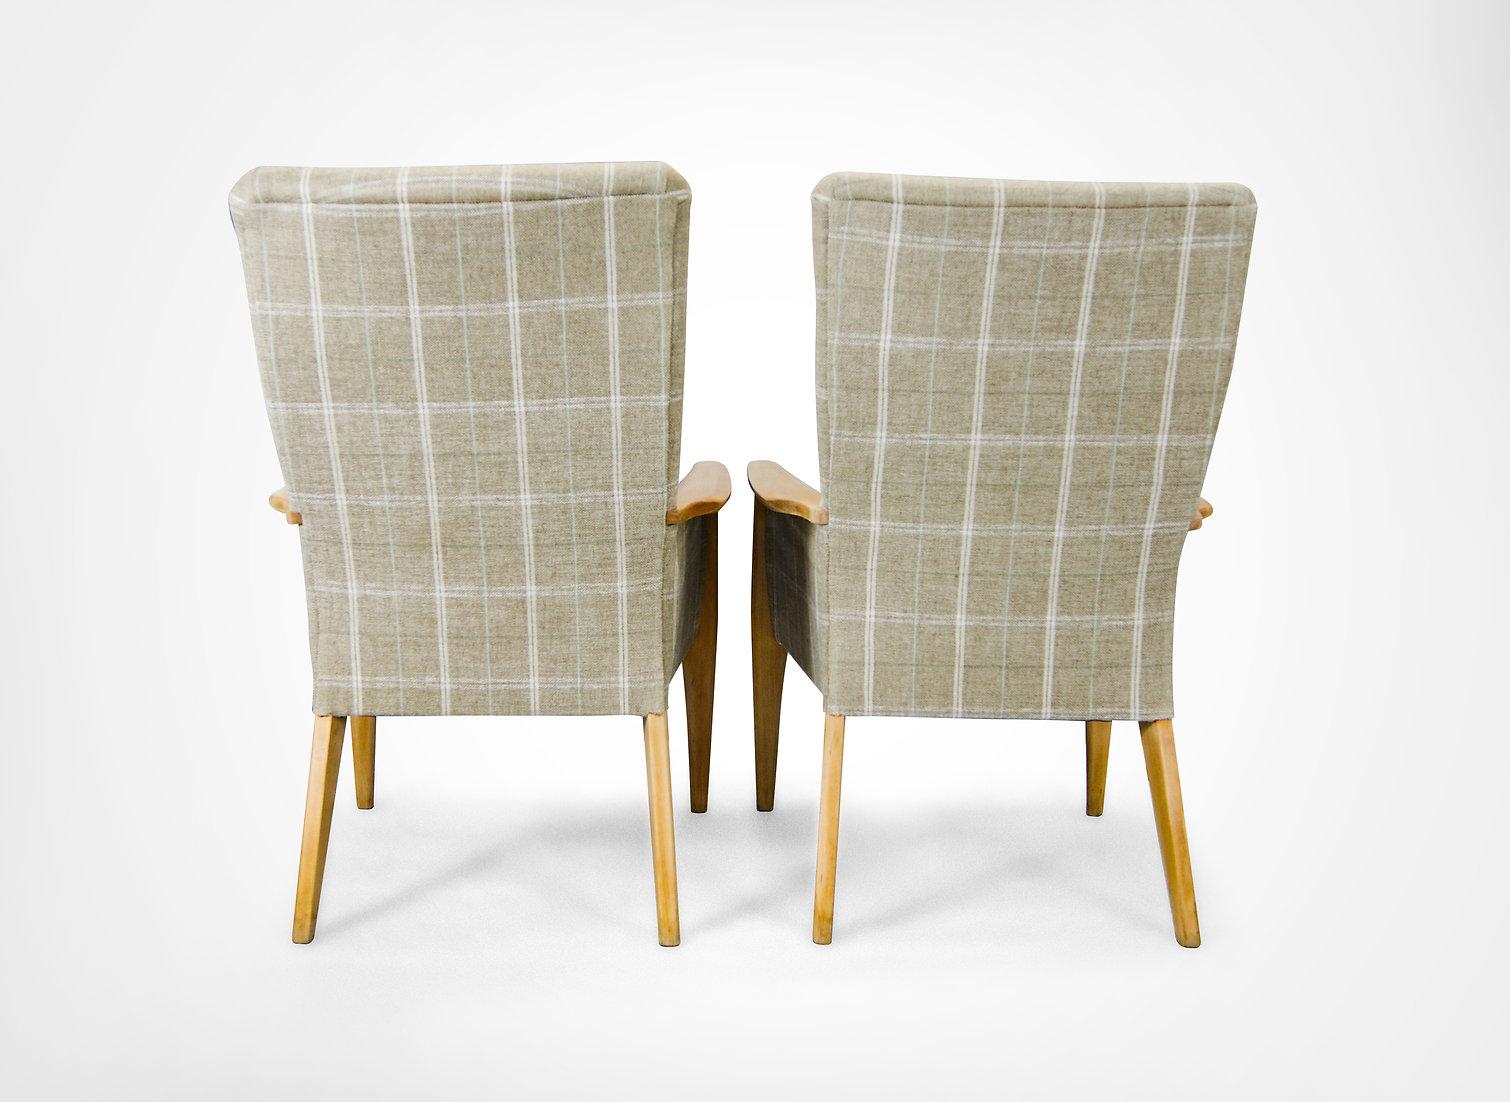 Paar Parker Knoll Clubsessel, Modell Nr. 988/1023 im Zustand „Gut“ im Angebot in Torquay, GB